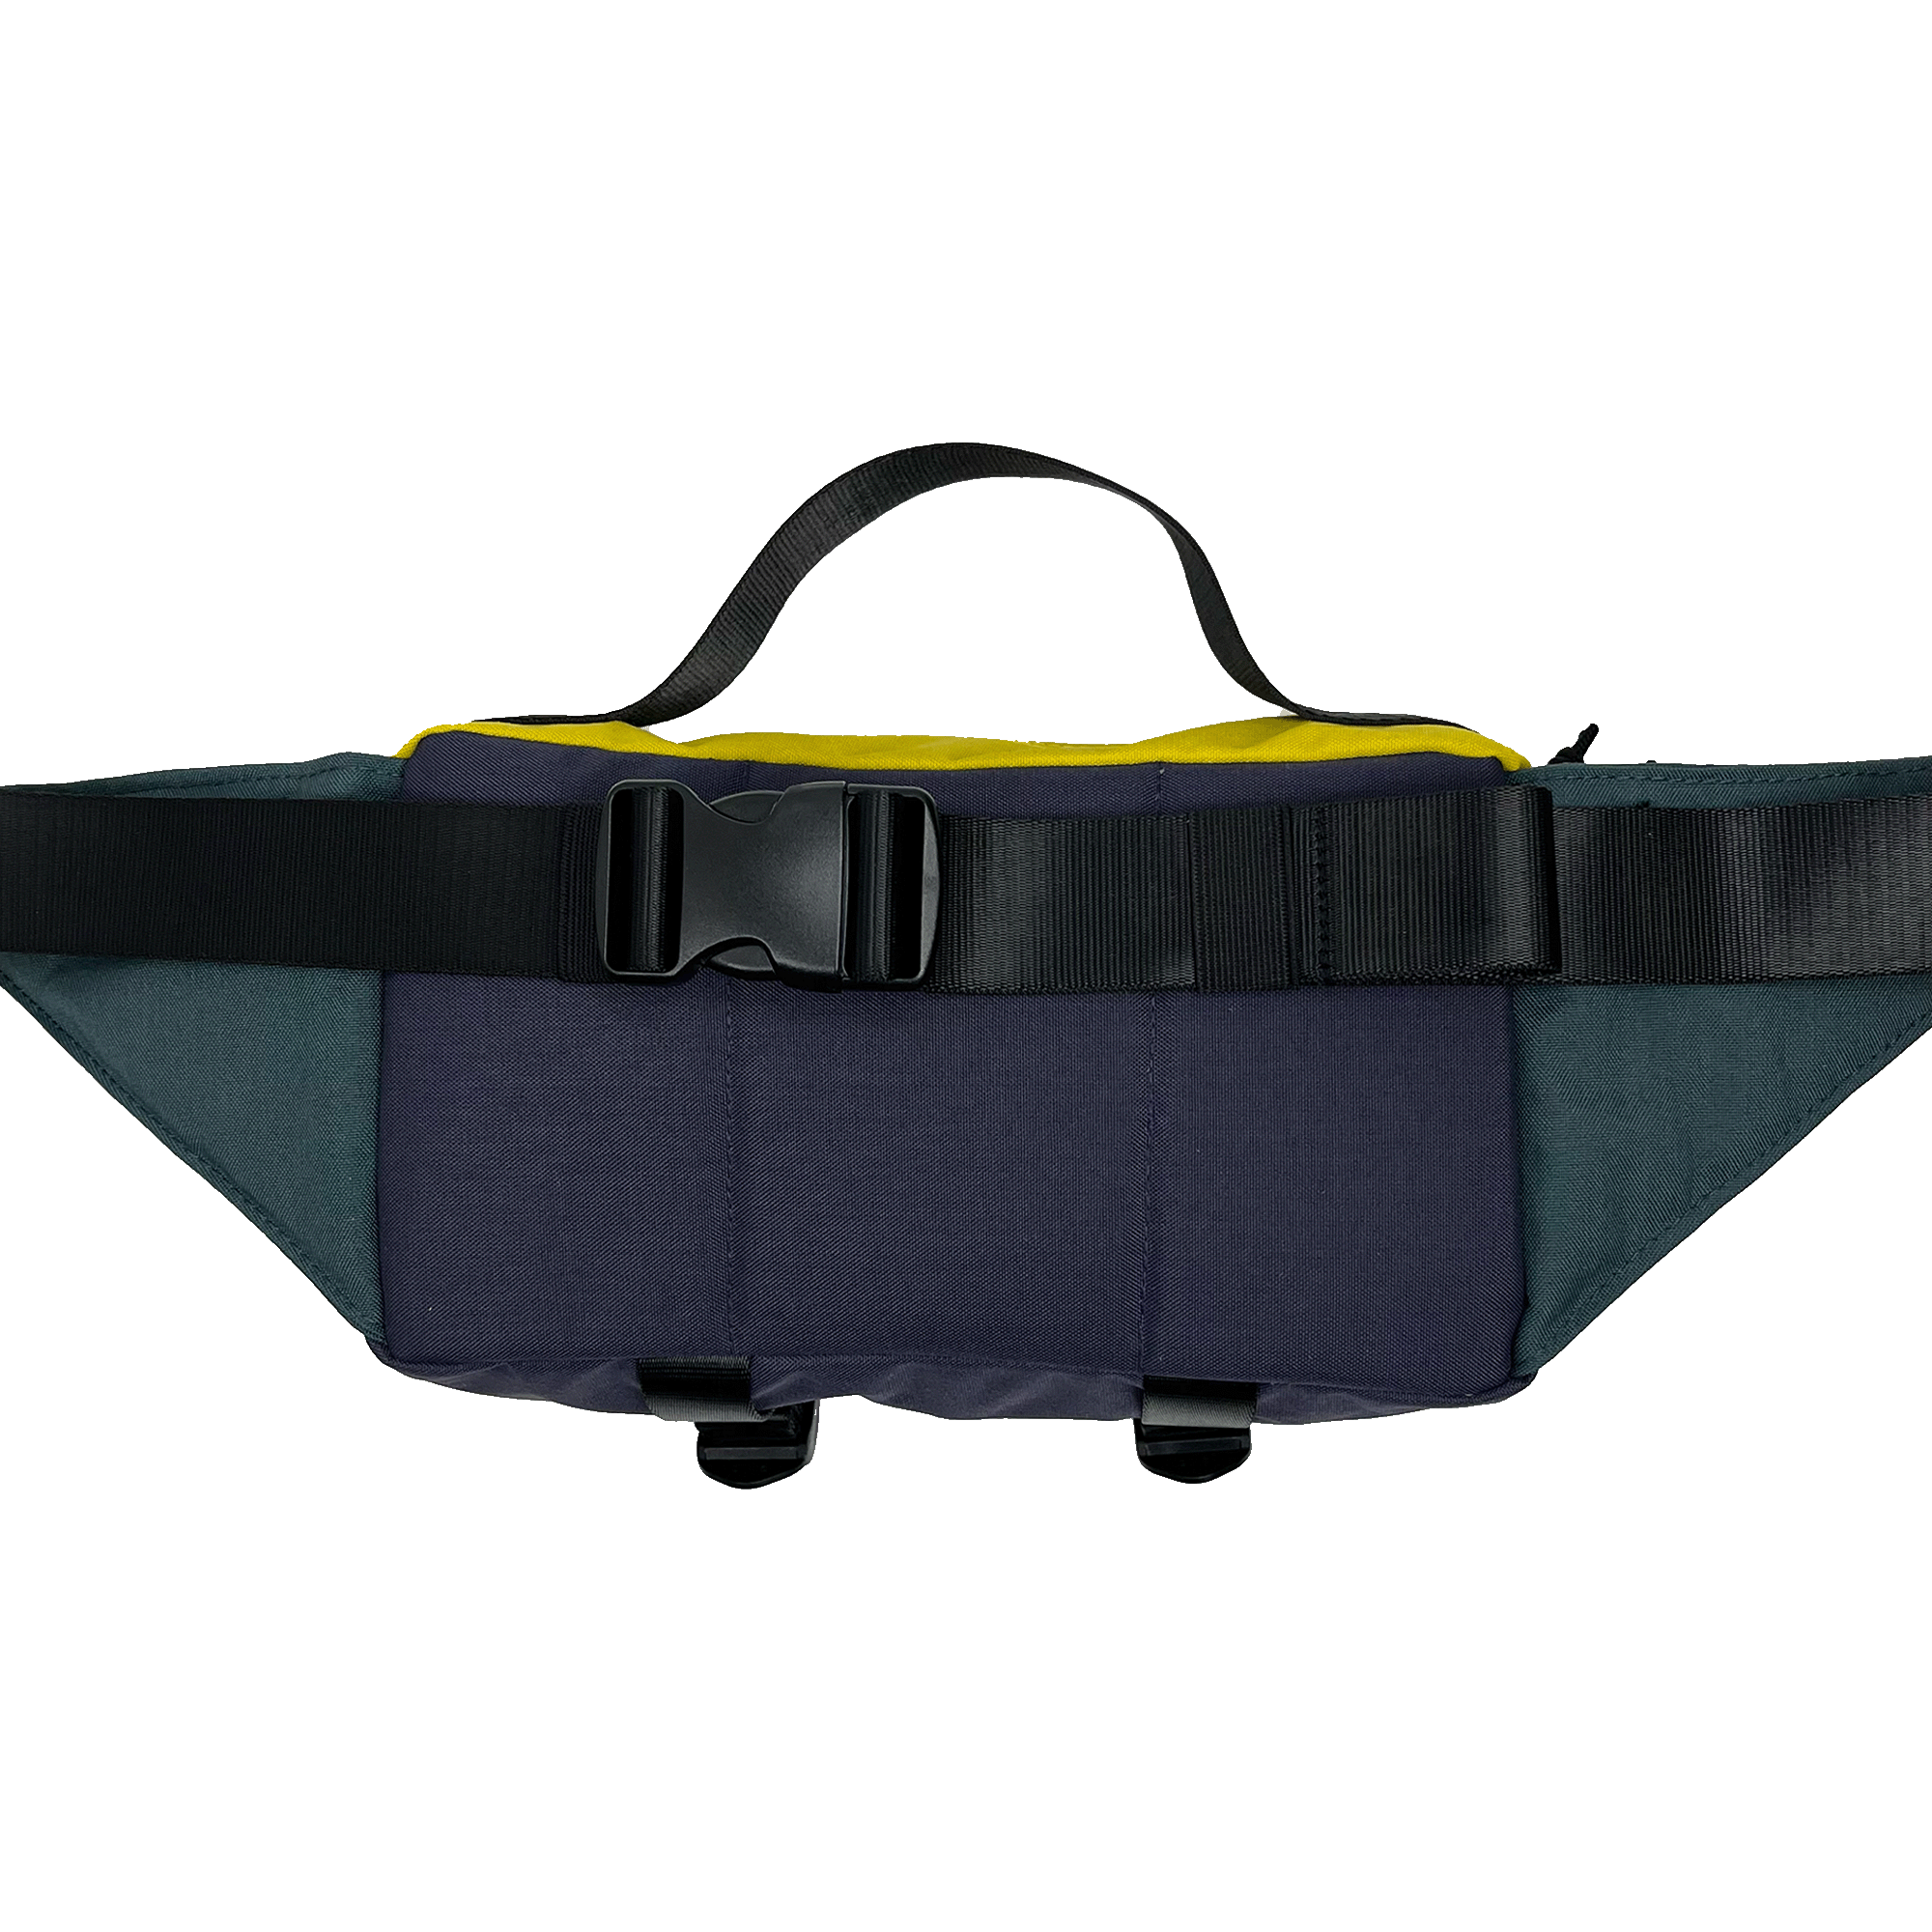 The backside of an Oakladish cross-body bag reveals color-blocked padding and a large hip belt with a durable clip.